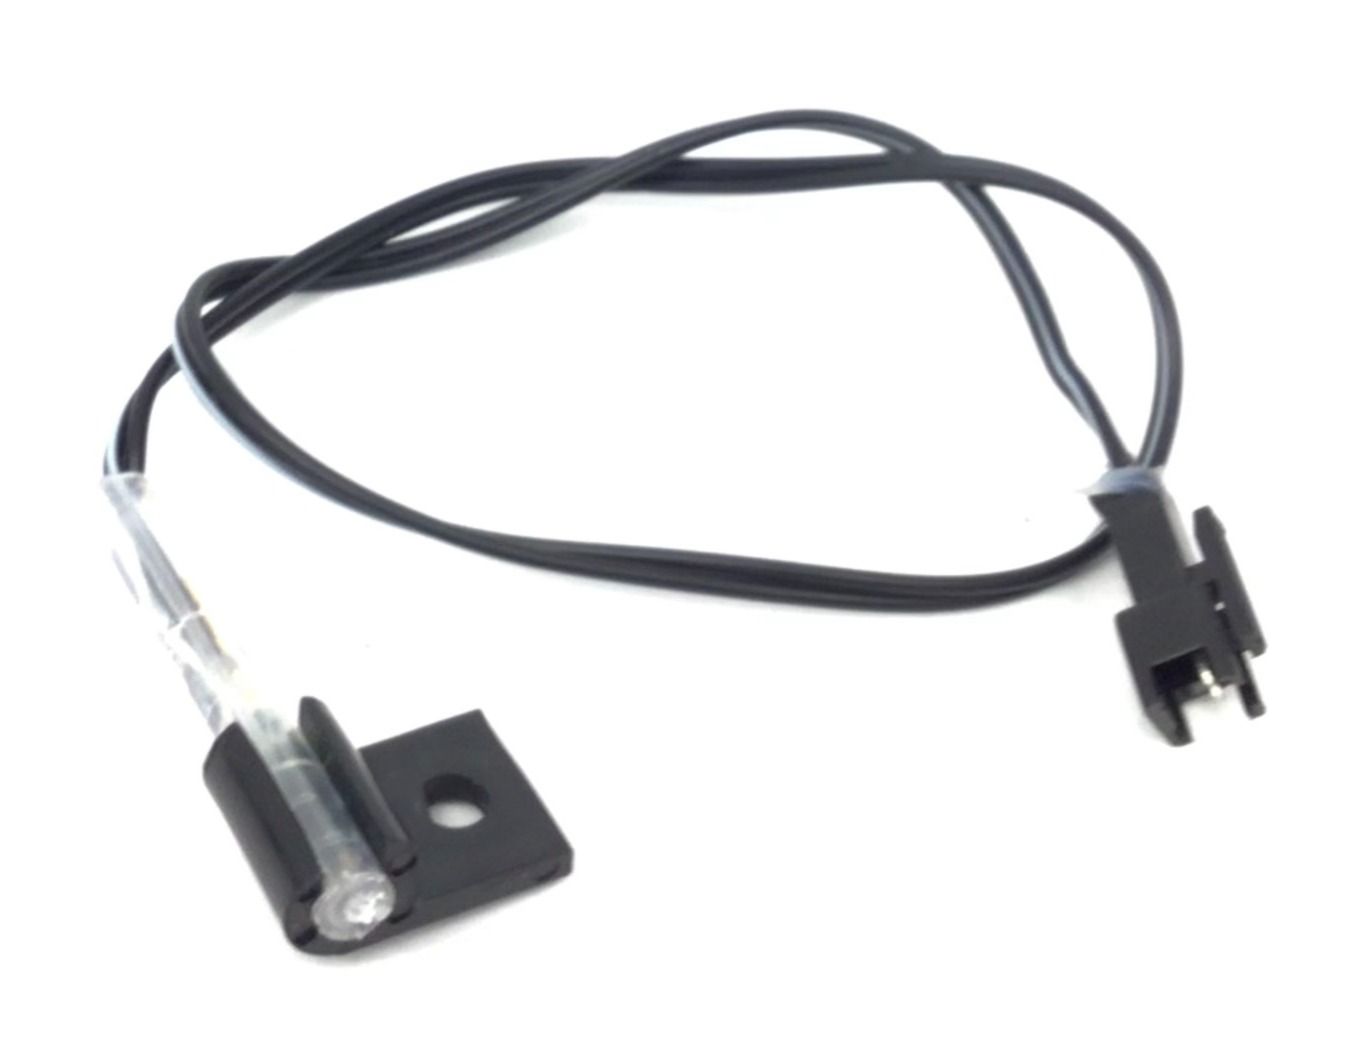 RPM Speed Sensor Reed Switch 2 Terminal Wire